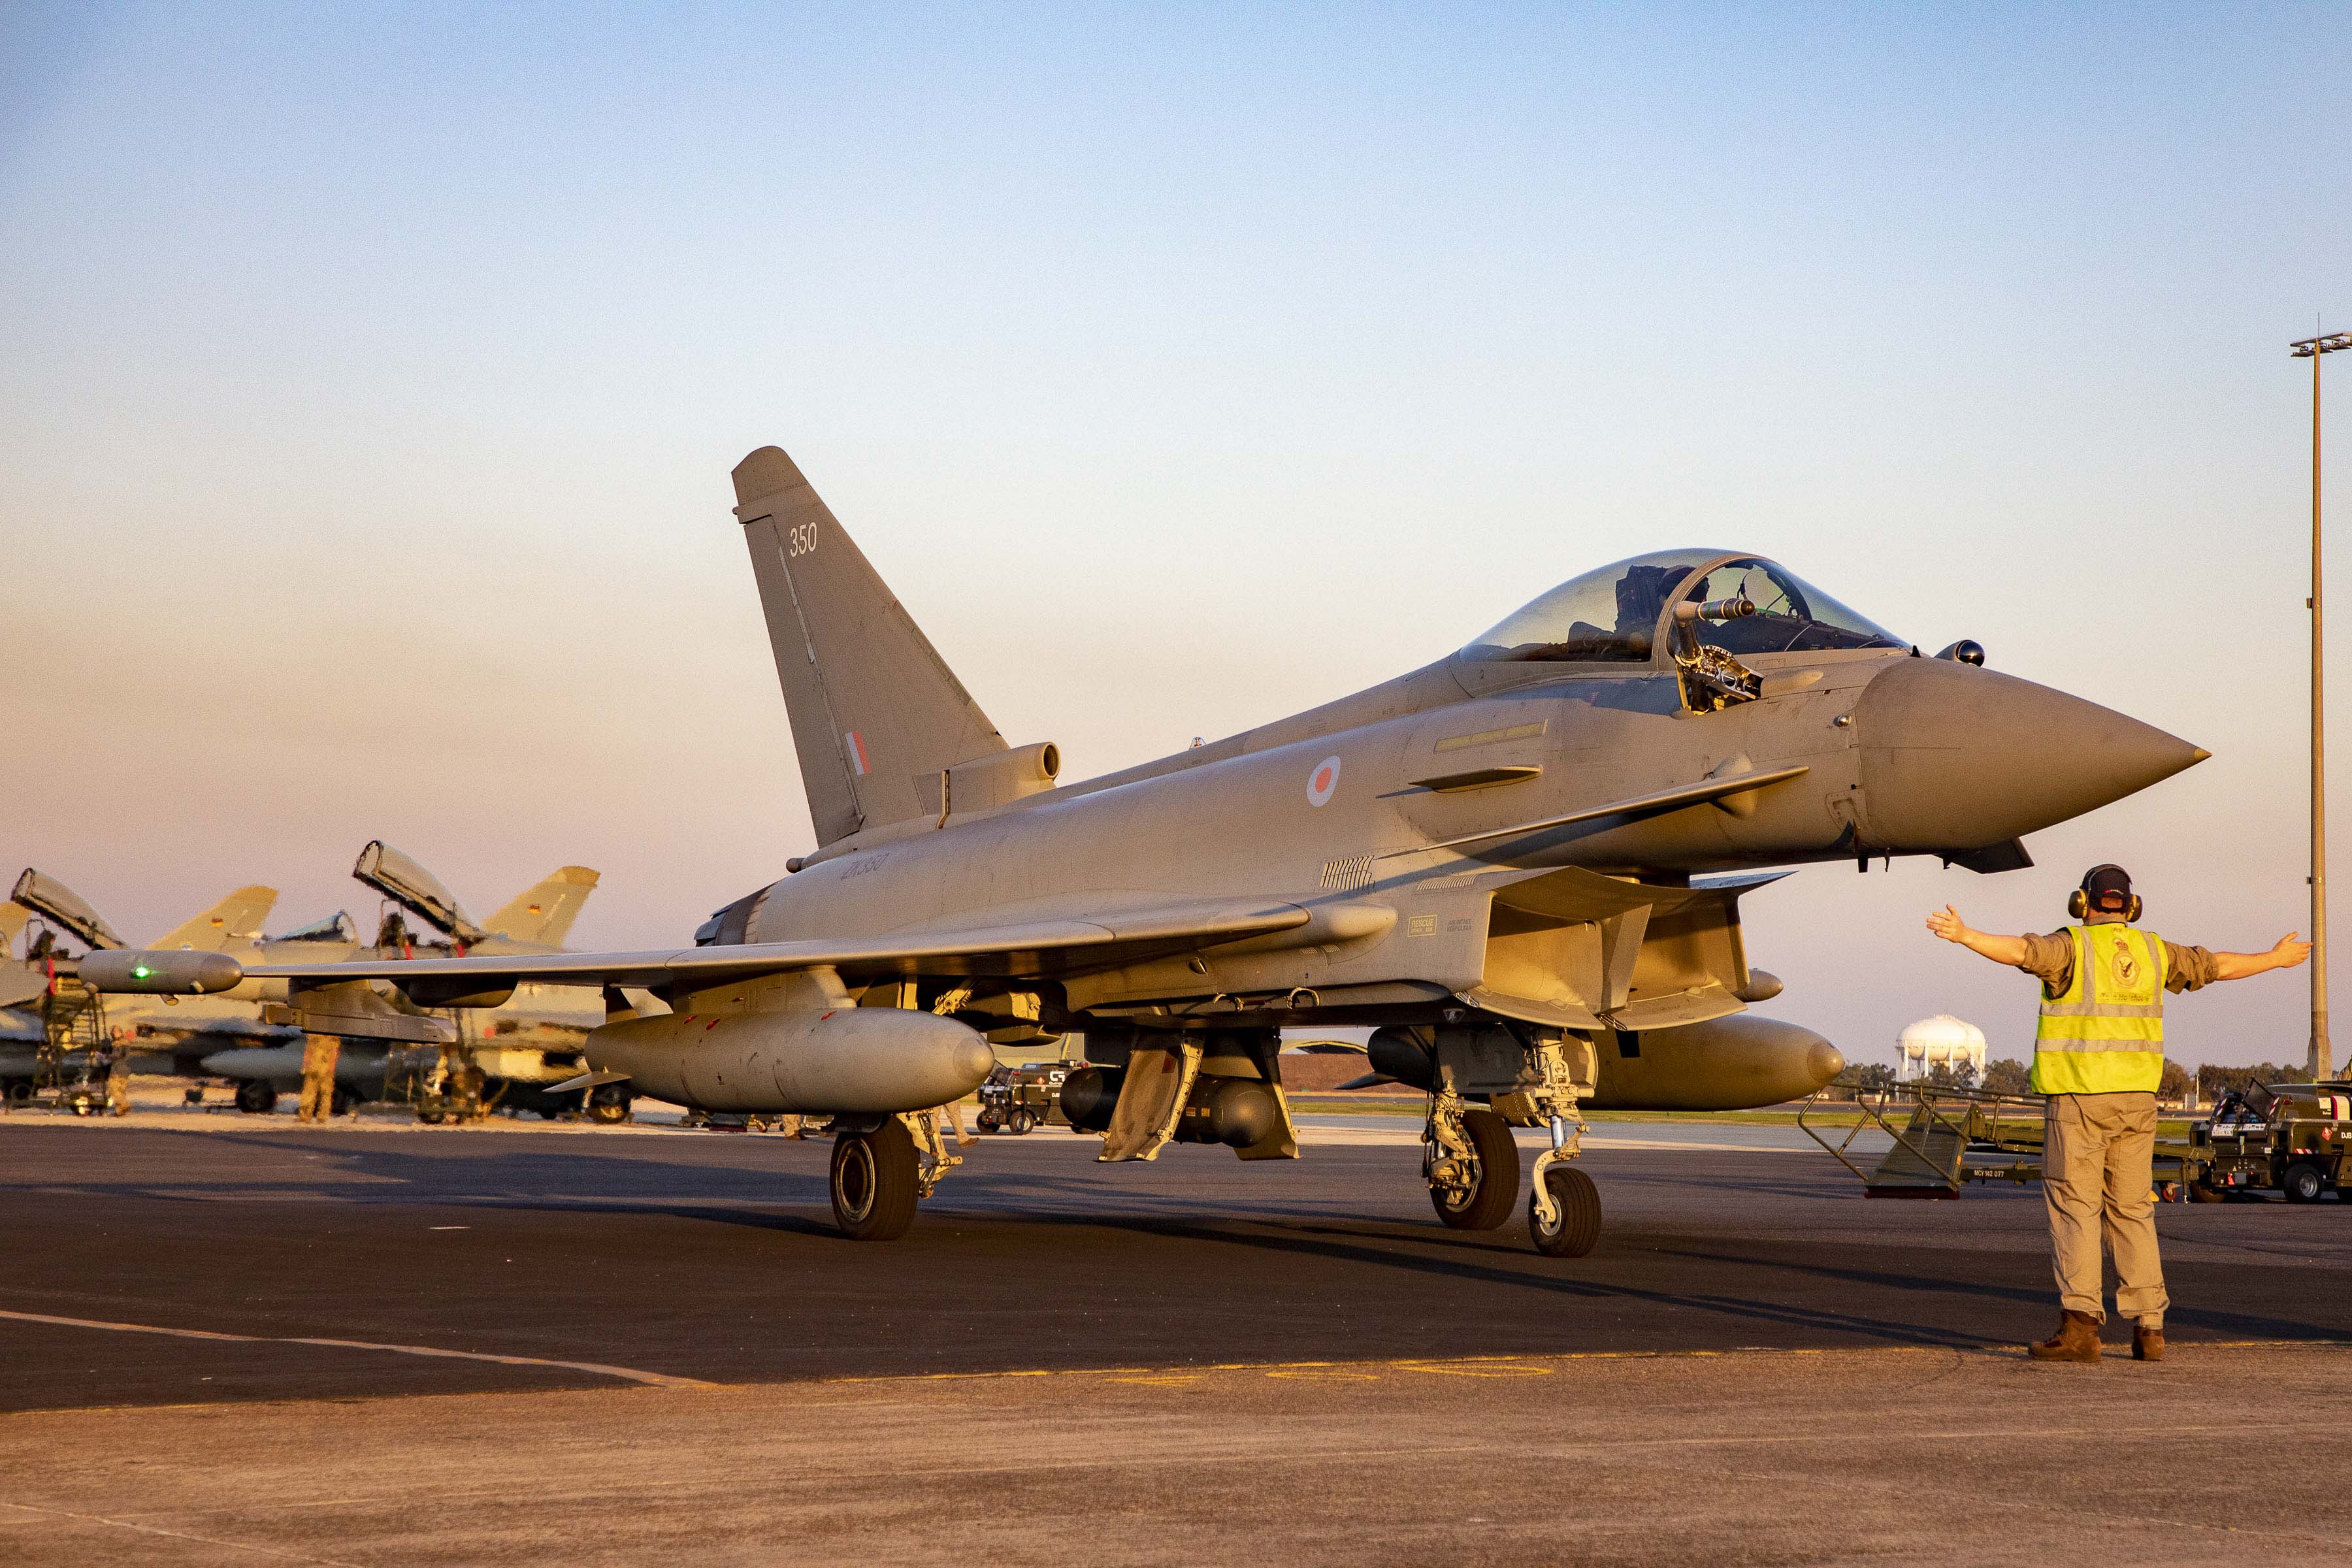 Image shows Typhoon aircraft on the airfield with RAF aviator guiding it.